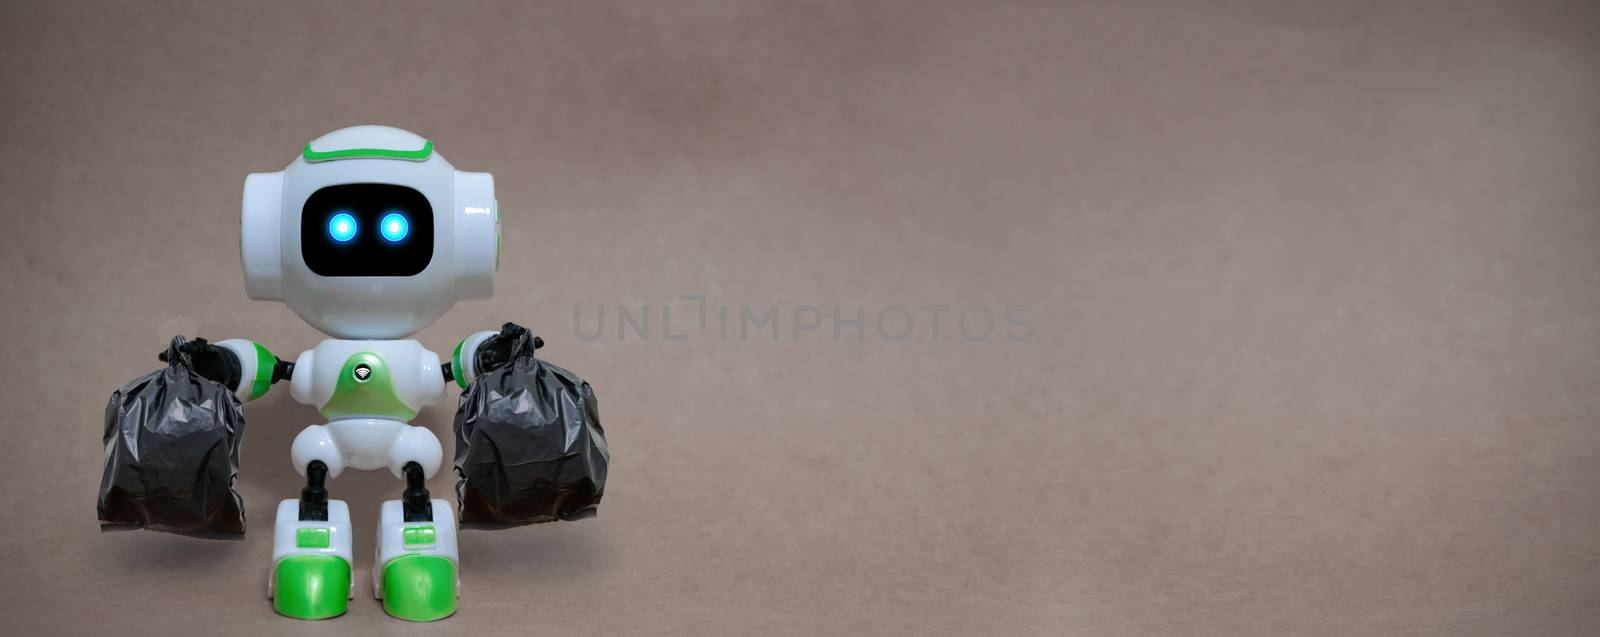 Robot hold garbage bags technology recycle environment on a gray background by sompongtom